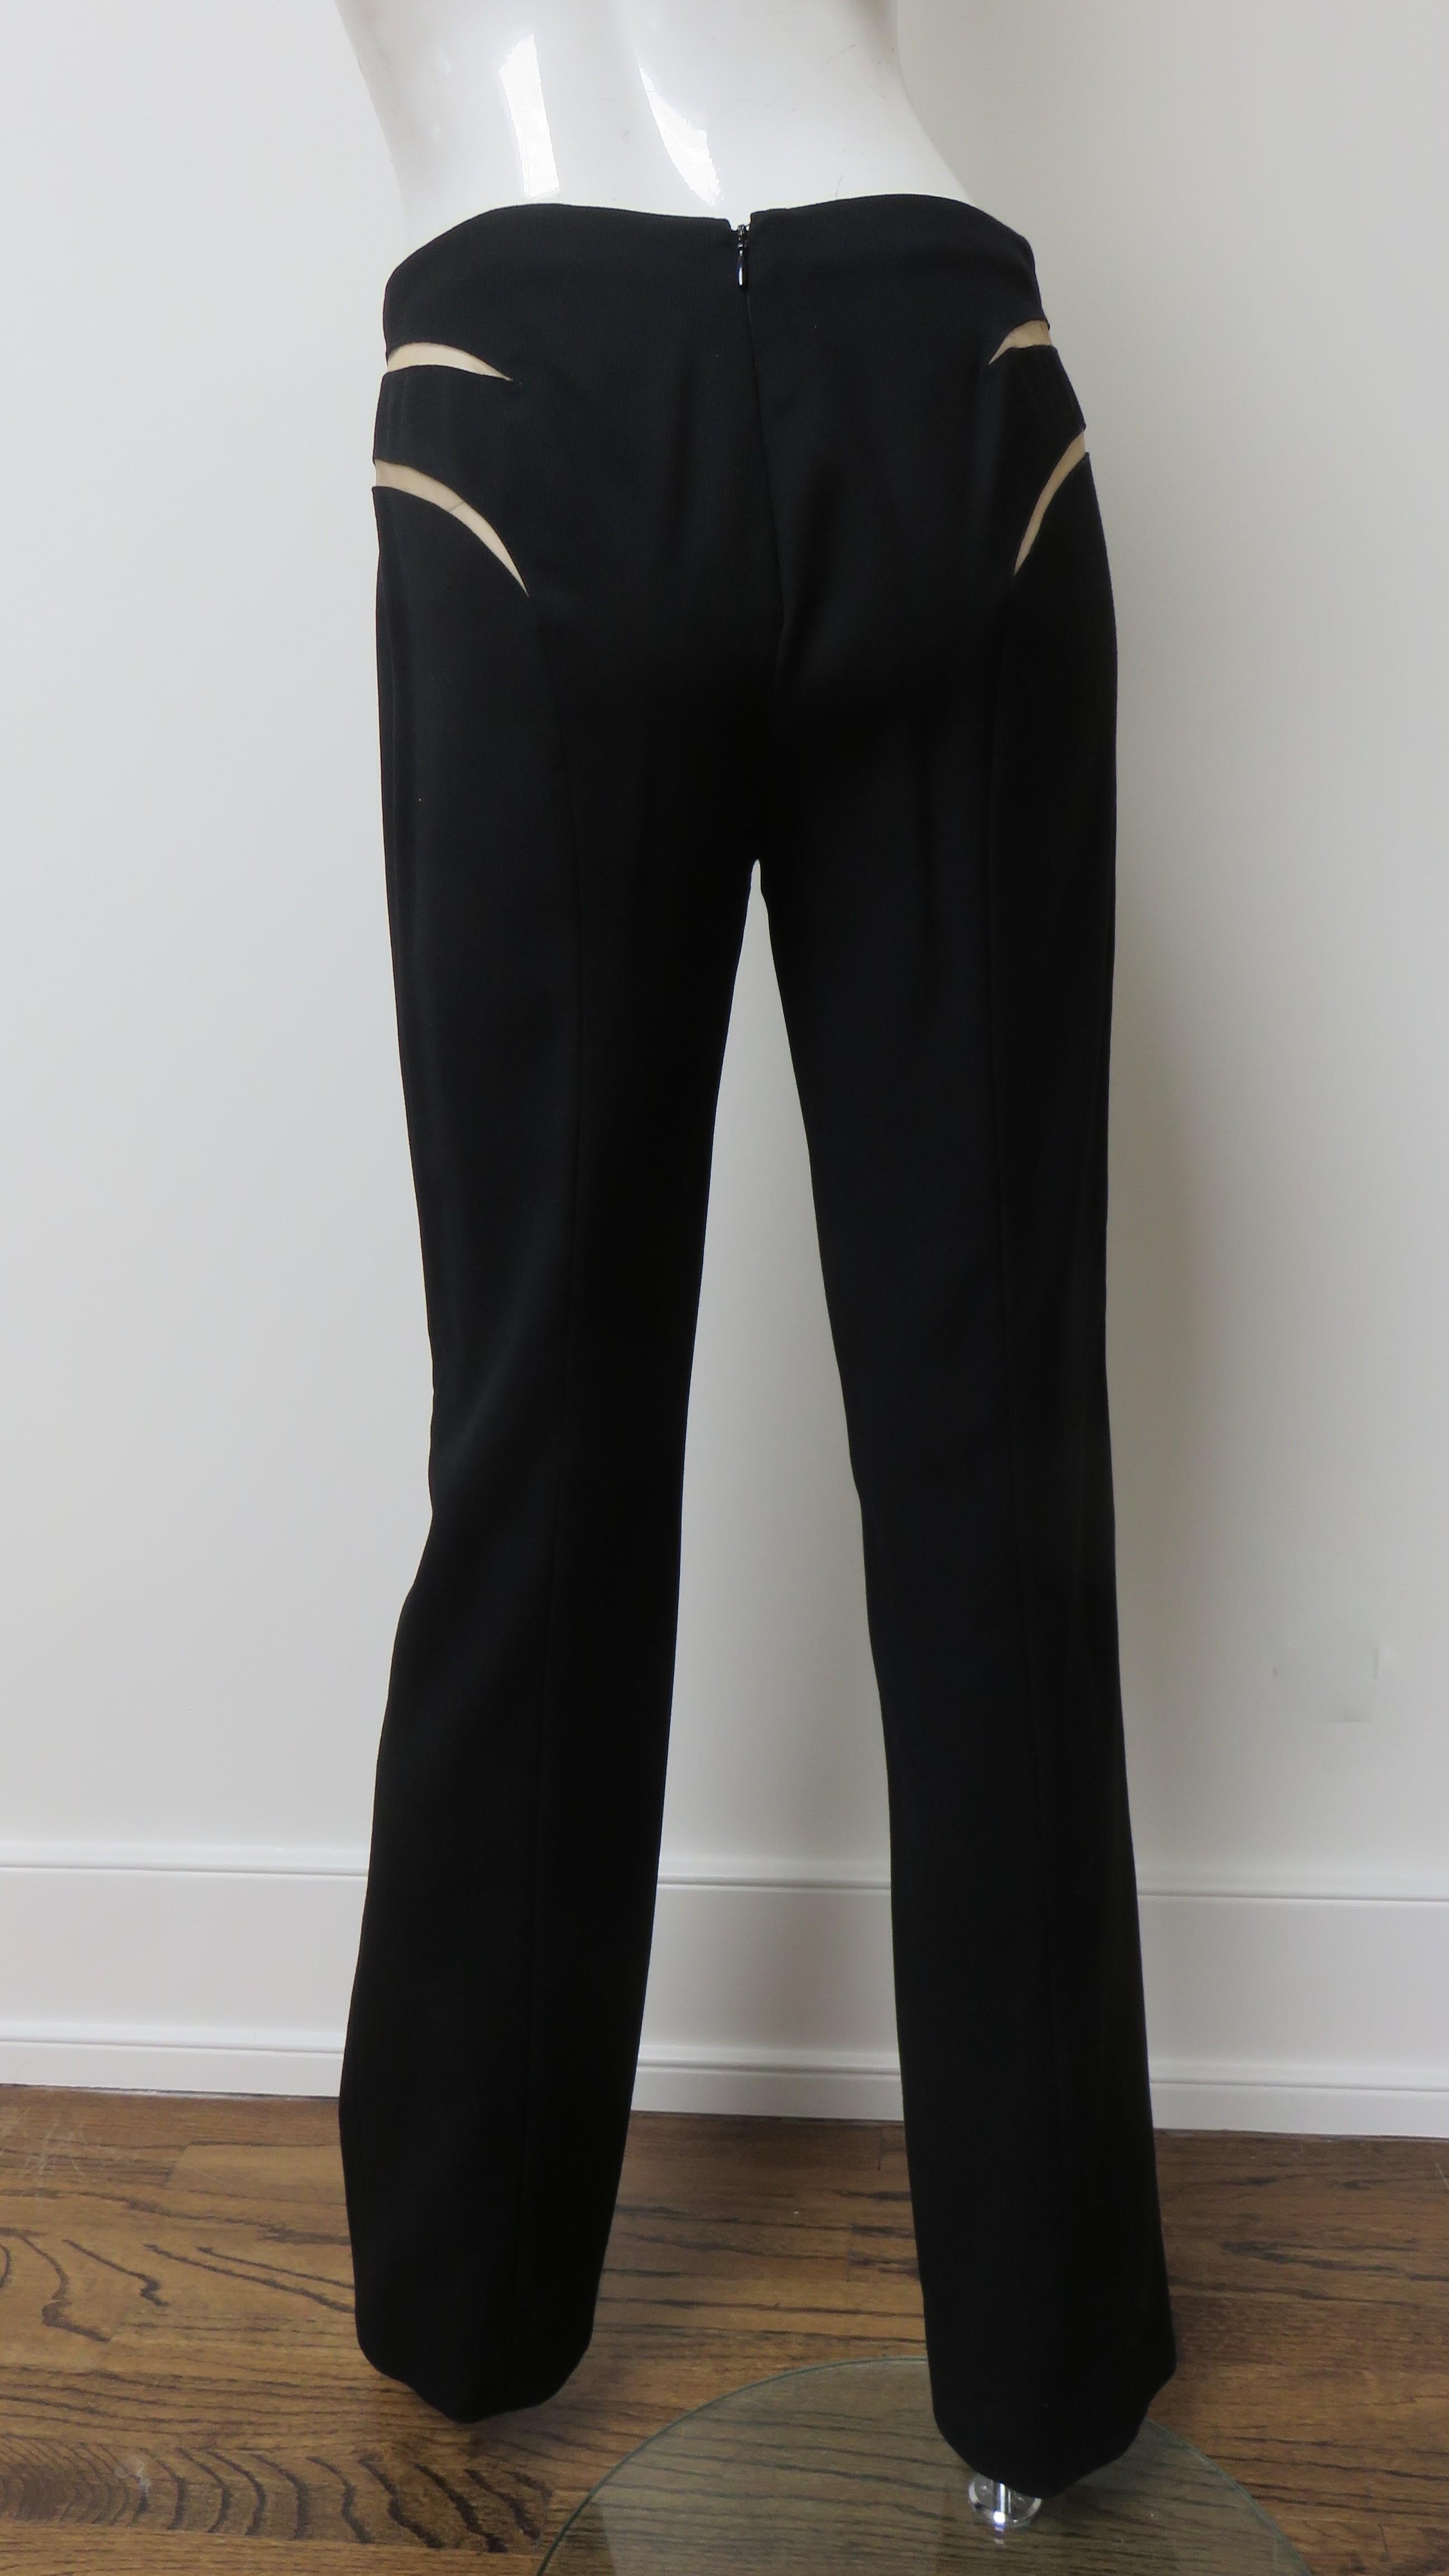 Gianni Versace Couture Silk Pant Suit with Cut outs 1990s For Sale 5